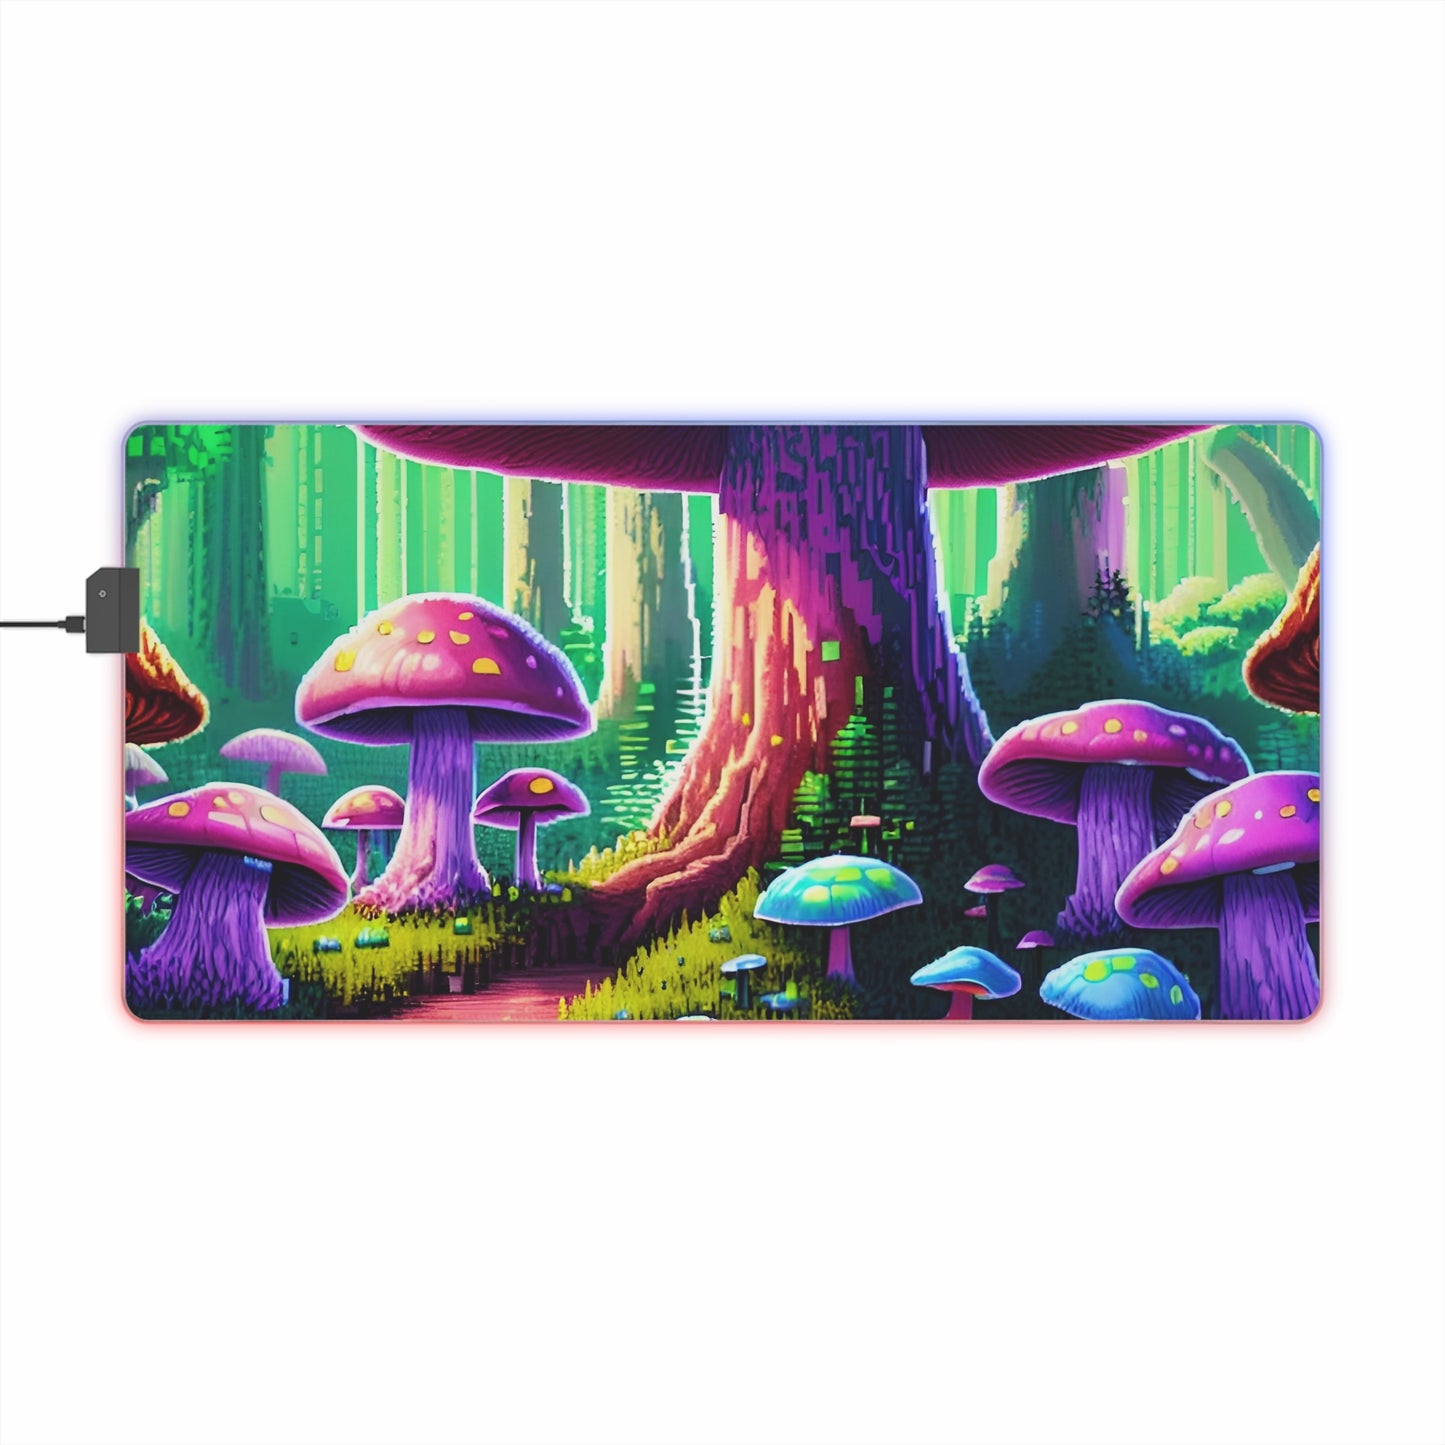 pixel mushroom forest 03 LED Gaming Mouse Pad